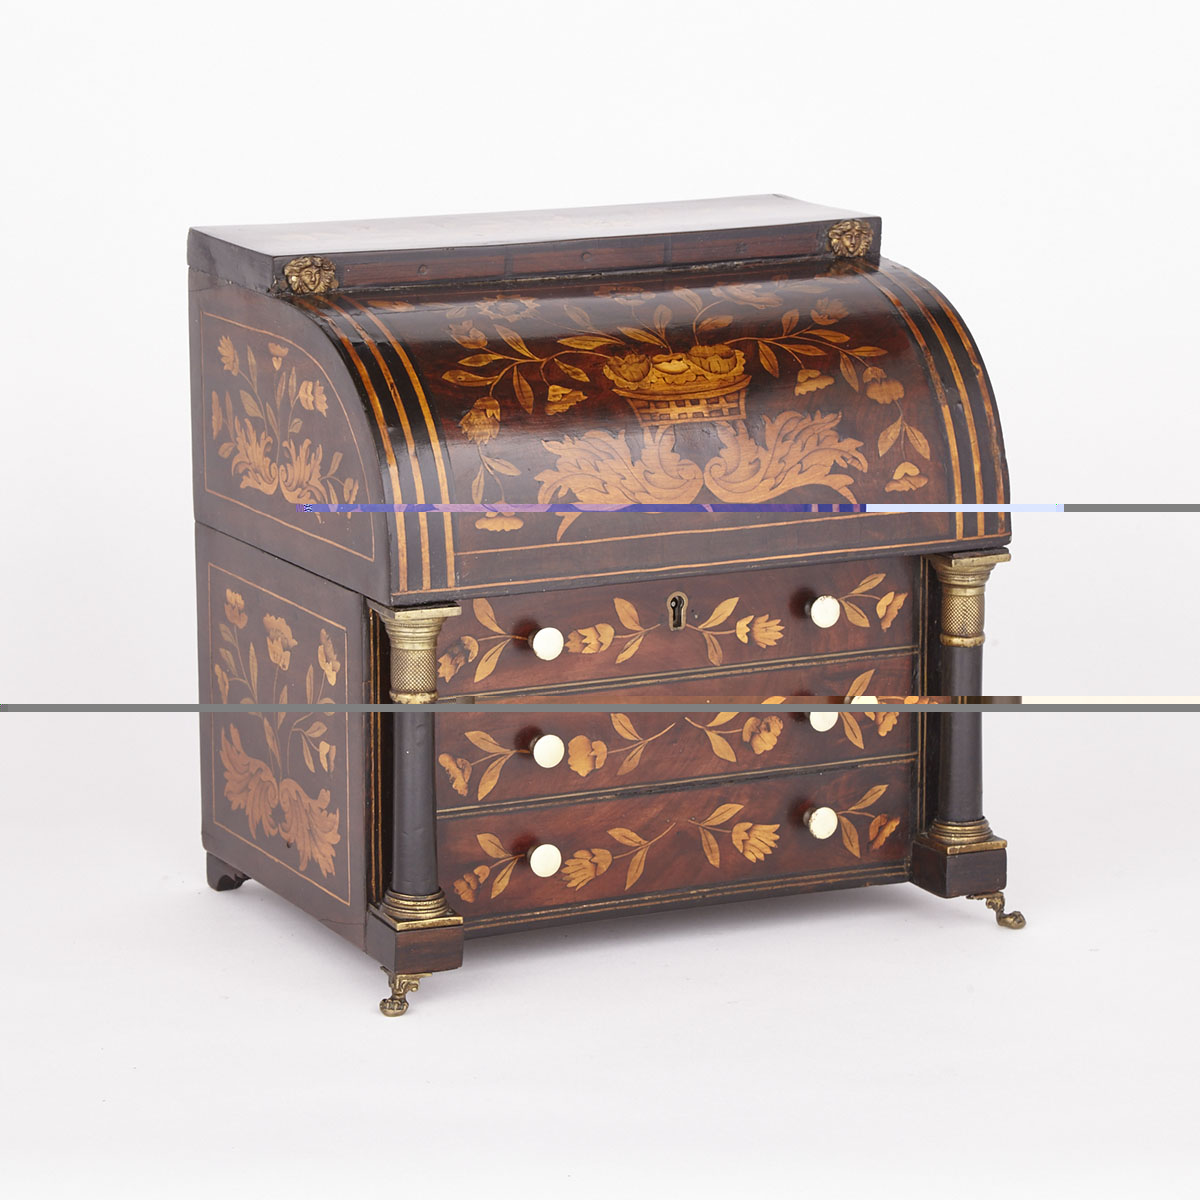 Dutch Floral Marquetry Inlaid Miniature Desk Form Jewellery Casket, early 19th century